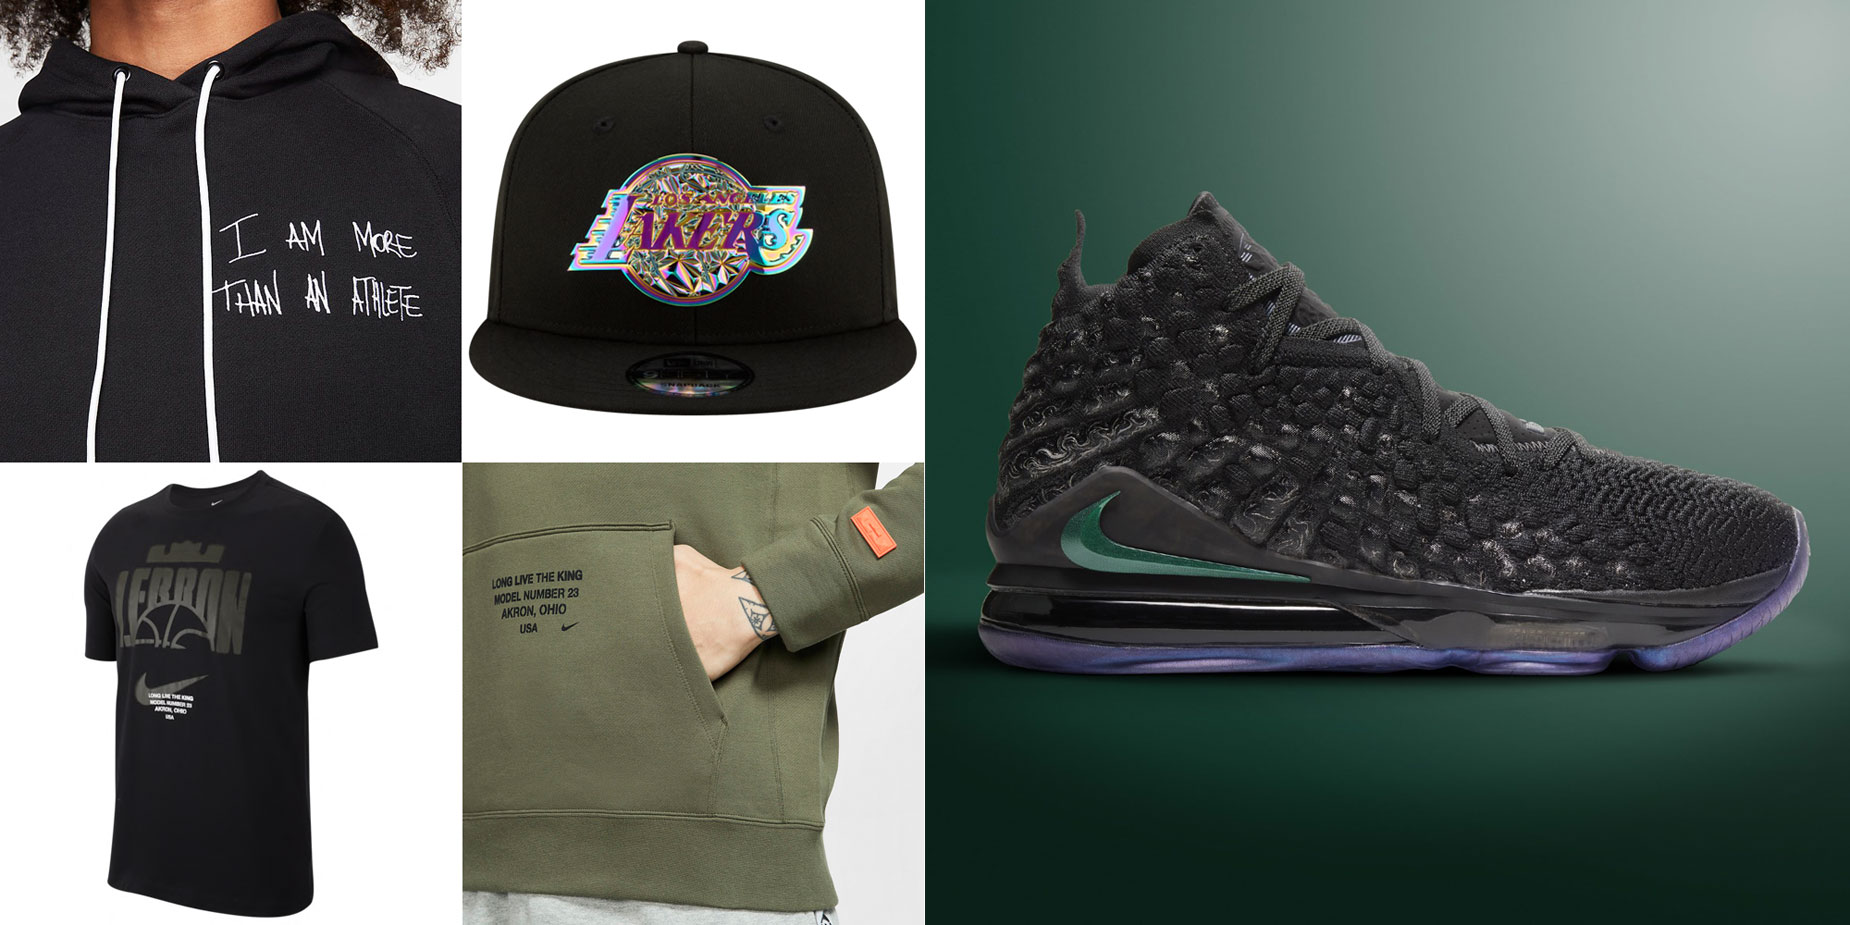 nike-lebron-17-currency-clothing-hat-match